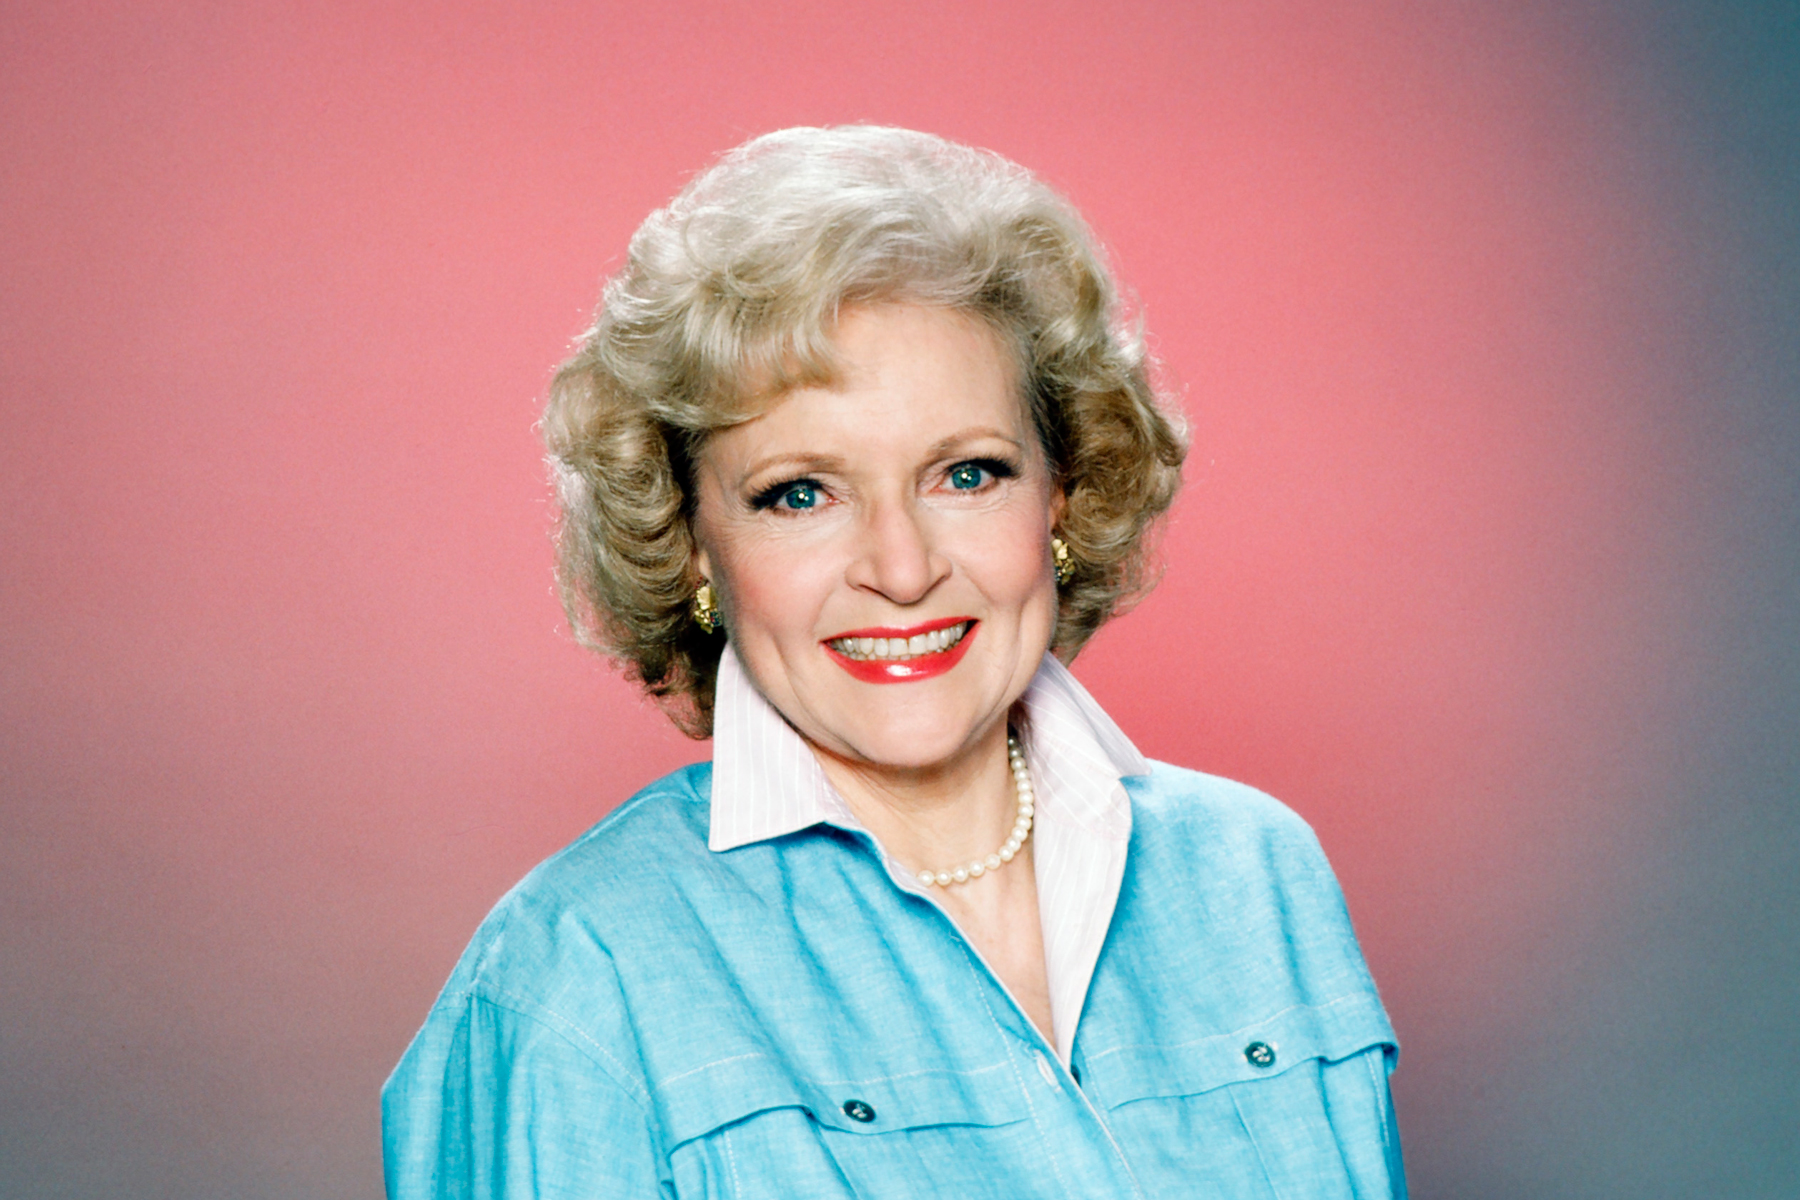 THE GOLDEN GIRLS -- Season 1 -- Pictured: Betty White as Rose Nylund -- (Photo by: Herb Ball/NBCU Photo Bank/NBCUniversal via Getty Images via Getty Images)